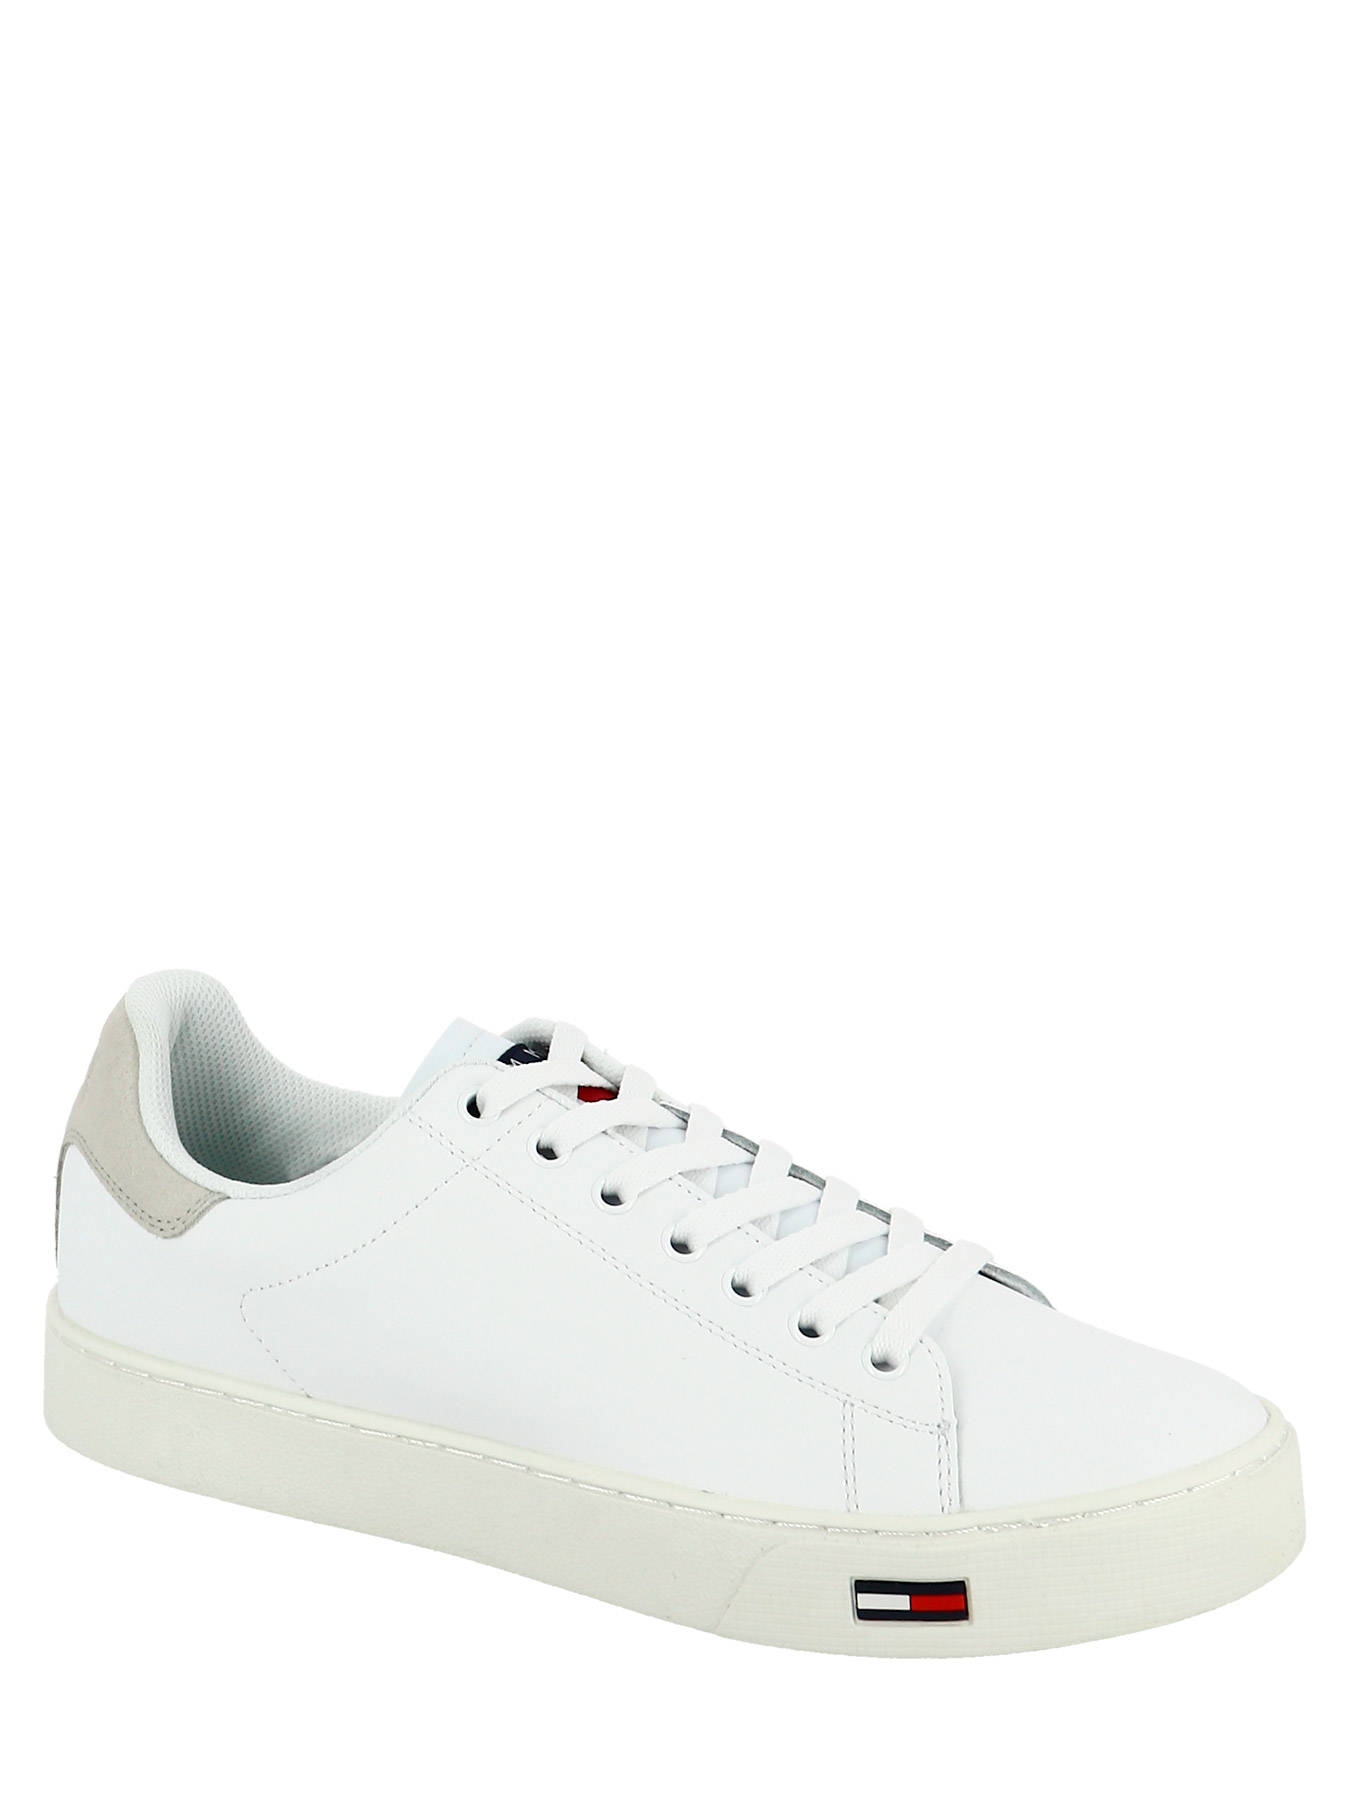 Tommy Hilfiger Sneakers ESSENTIAL.TOM - best prices